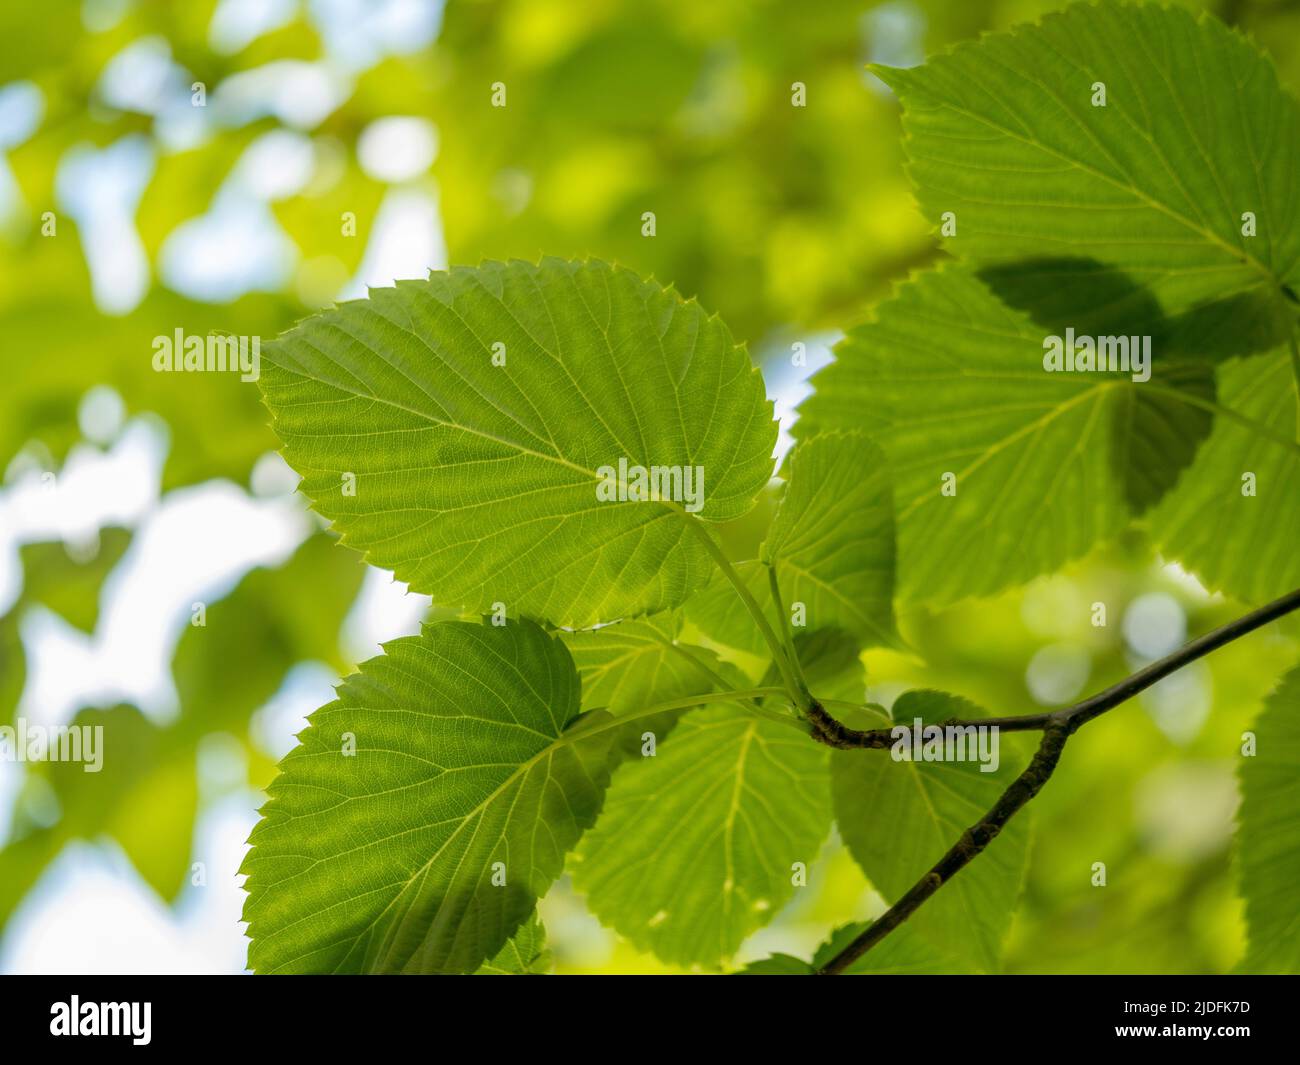 Closeup of leaves from Davidia involucrata also known as the handkerchief tree. Stock Photo